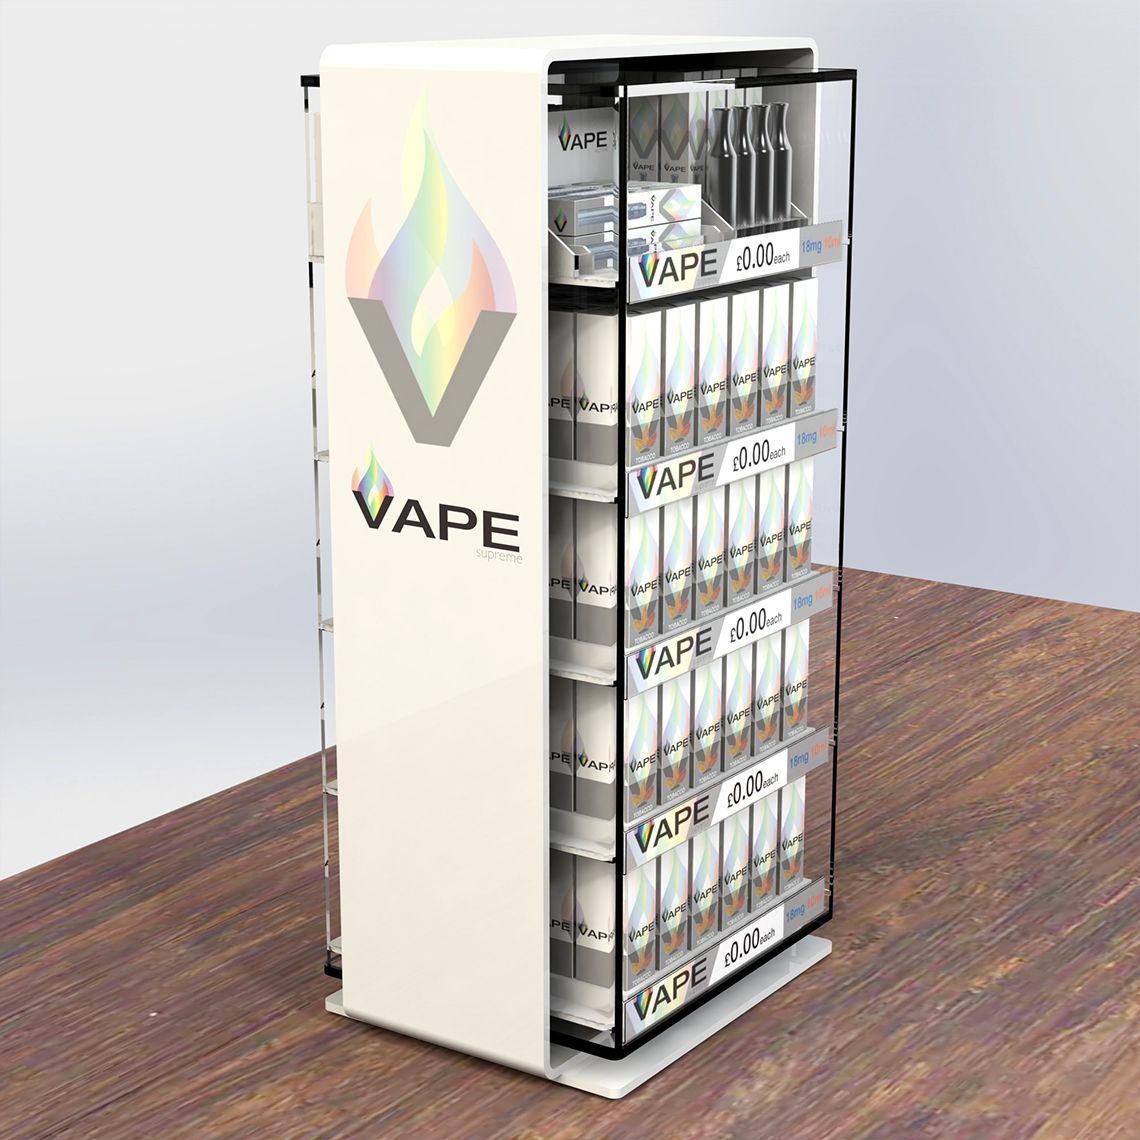 Affective disposable Vape device and e-liquid display stand